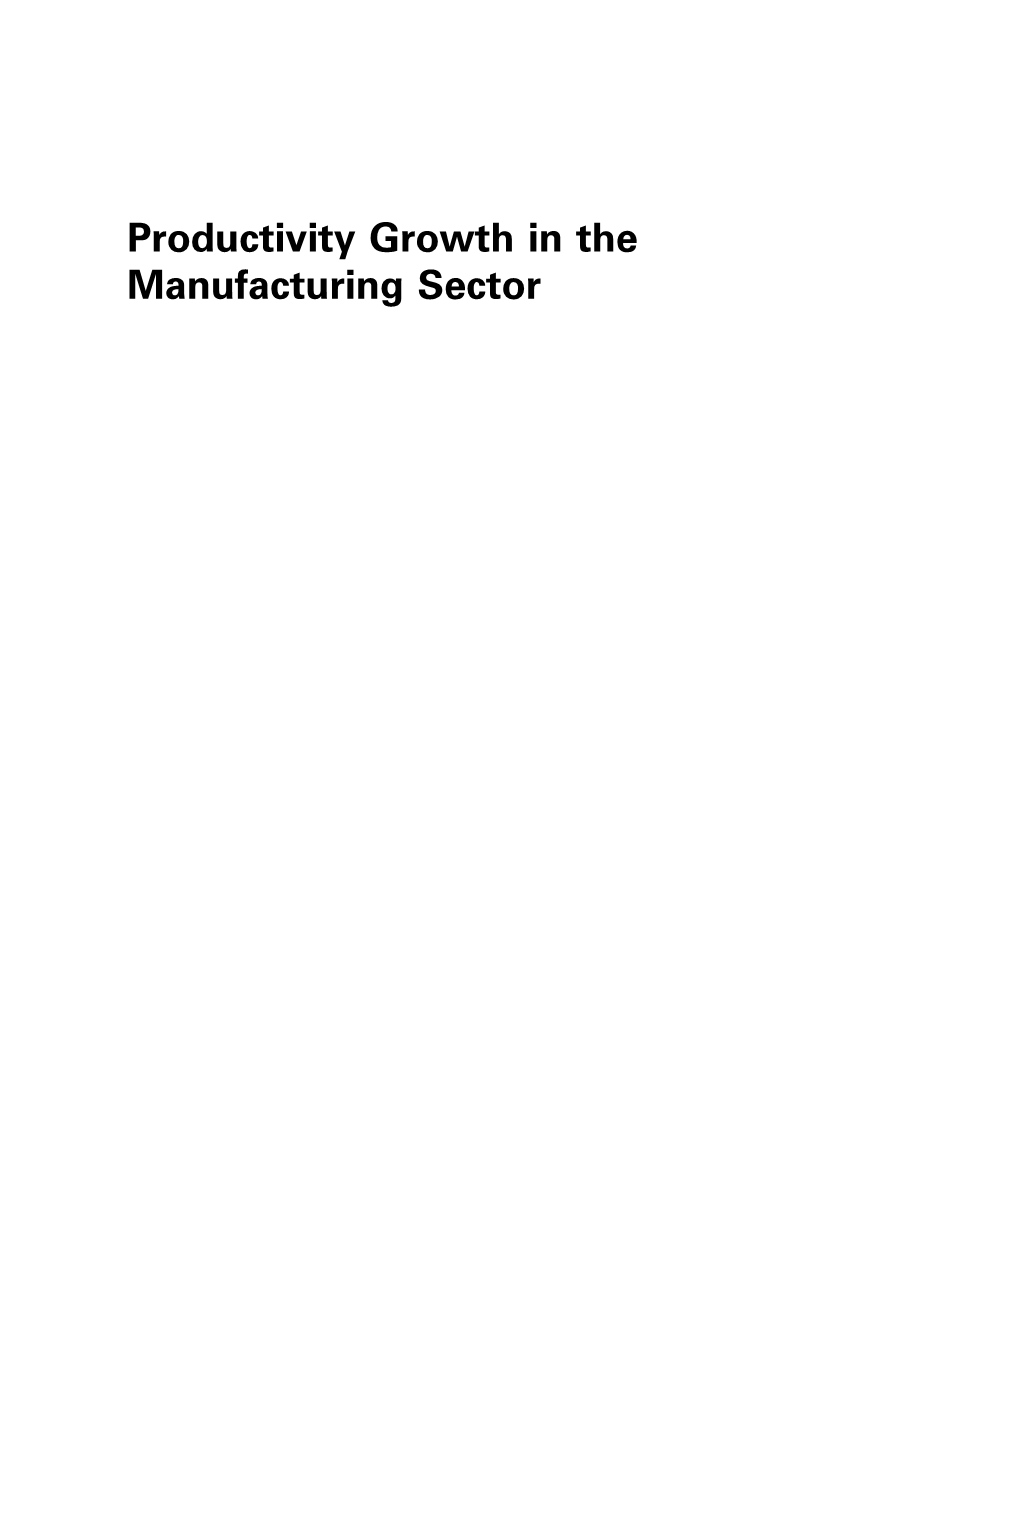 Productivity Growth in the Manufacturing Sector: Mitigating Global Recession